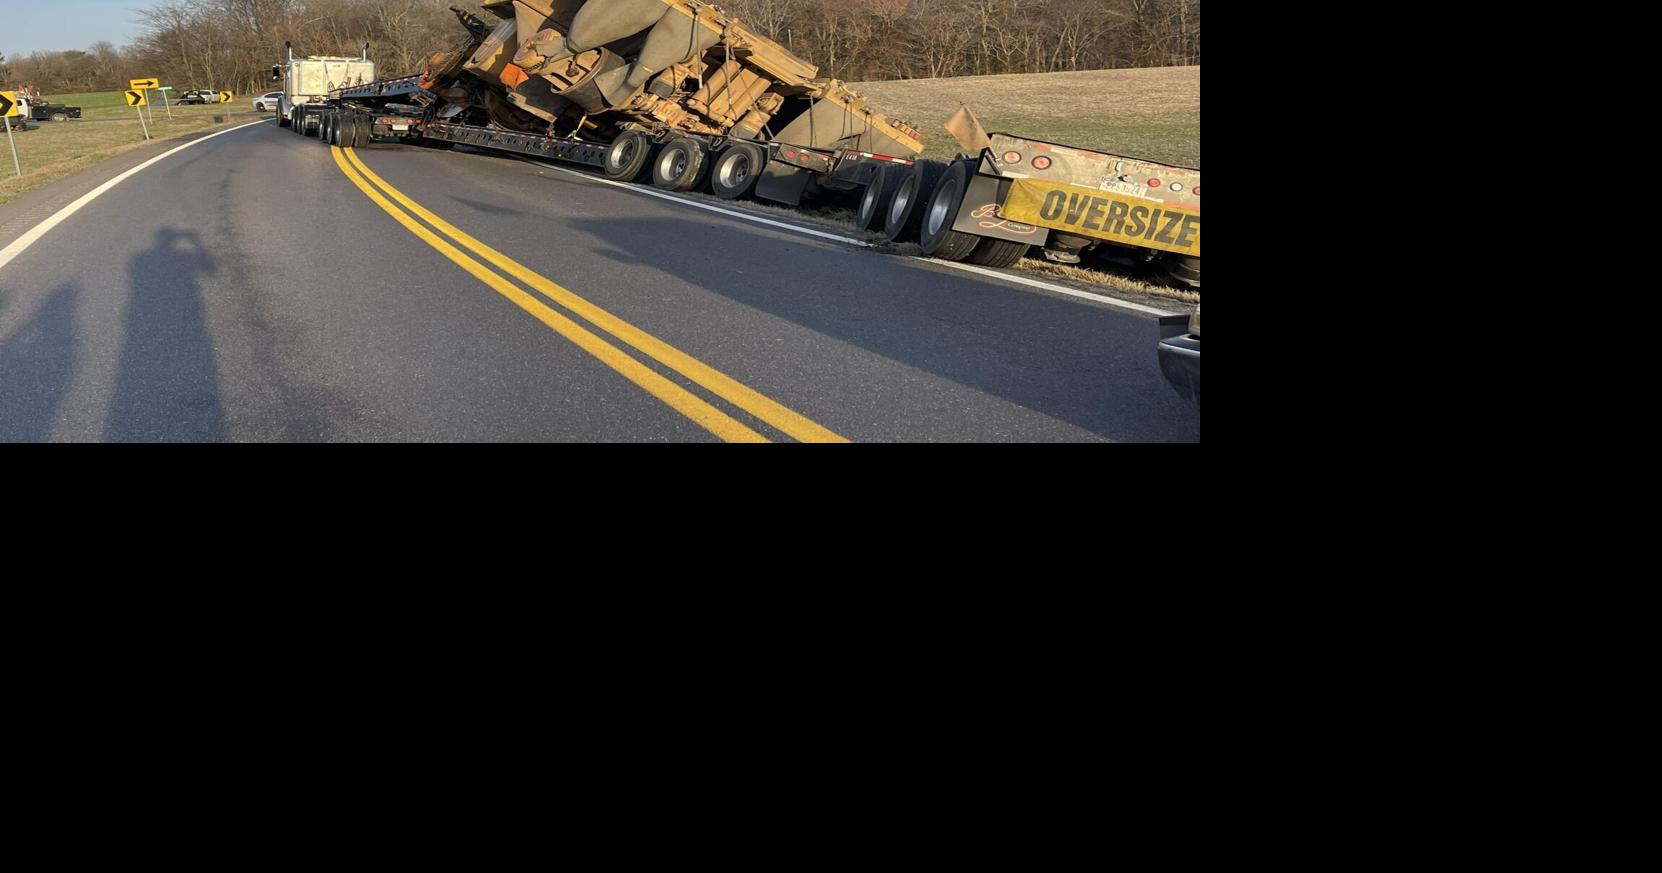 U.S. 60 blocked west of Kevil, Kentucky, after oversized load falls off truck